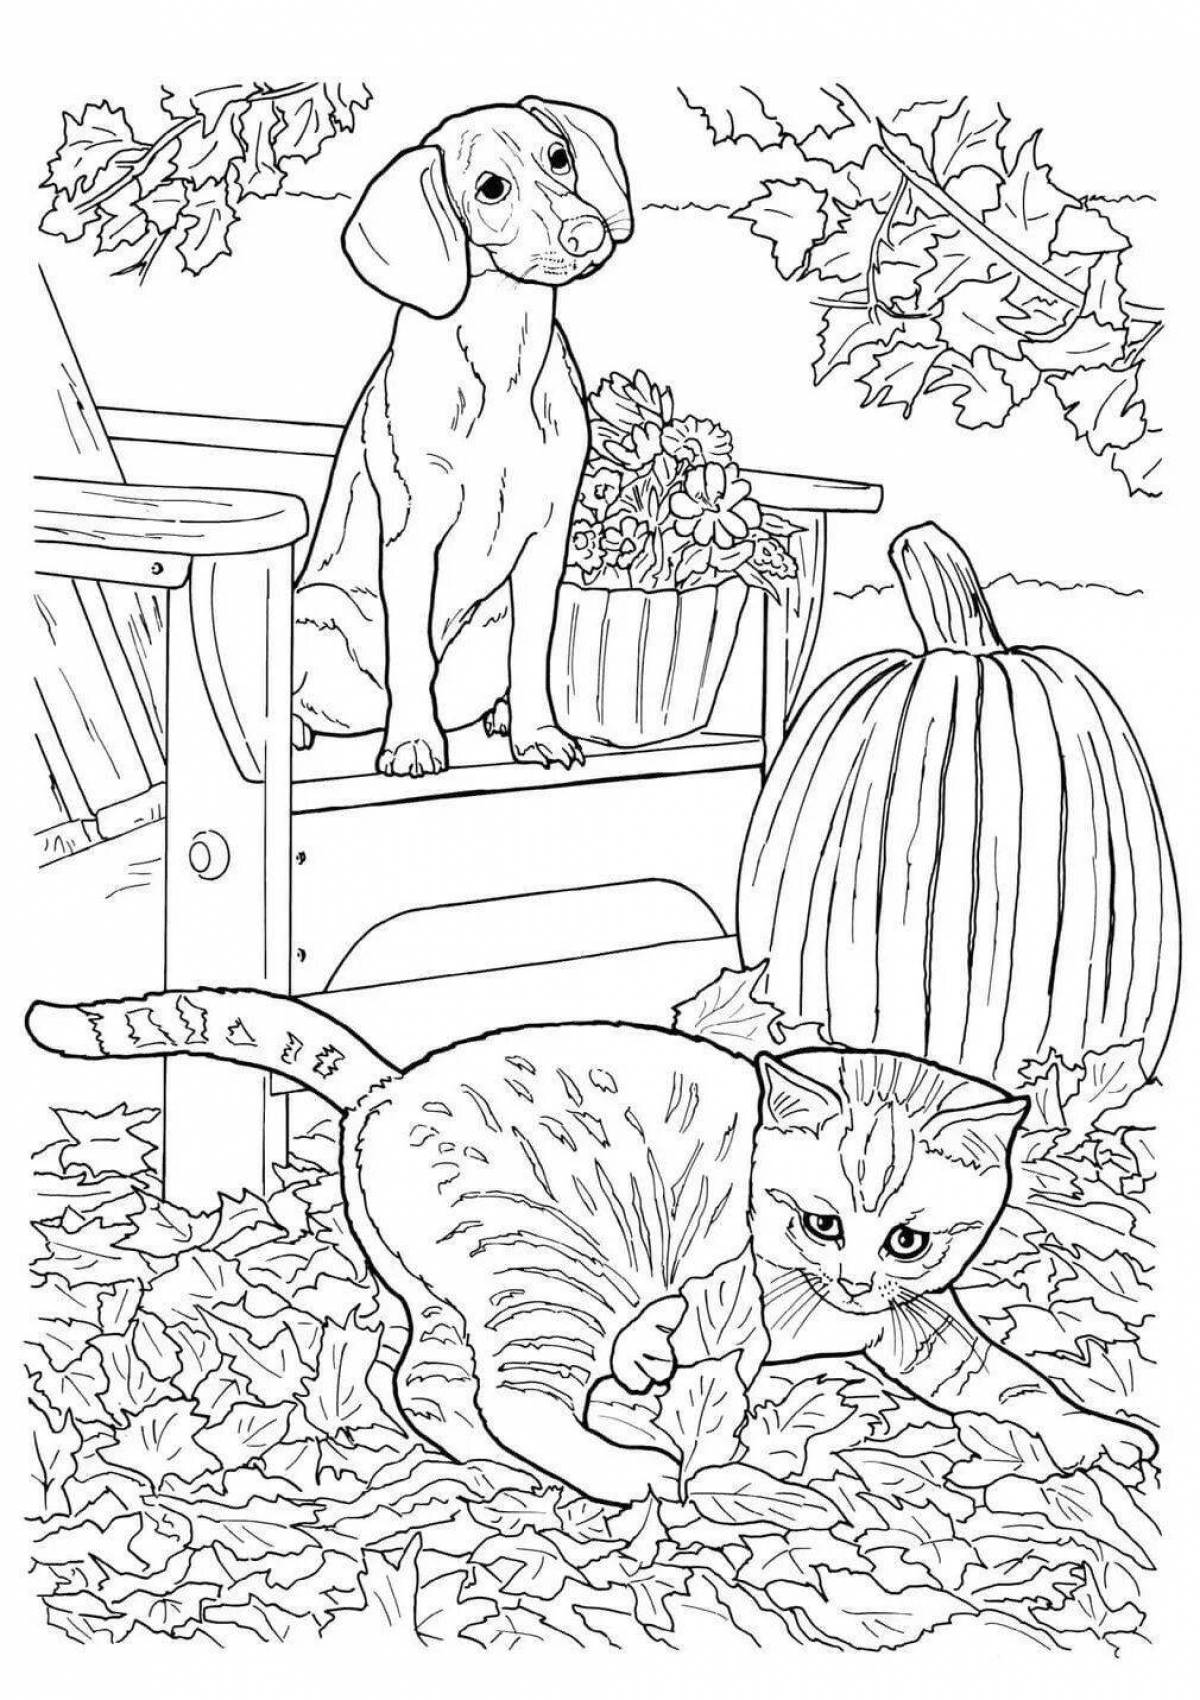 Funny coloring book for dogs and cats